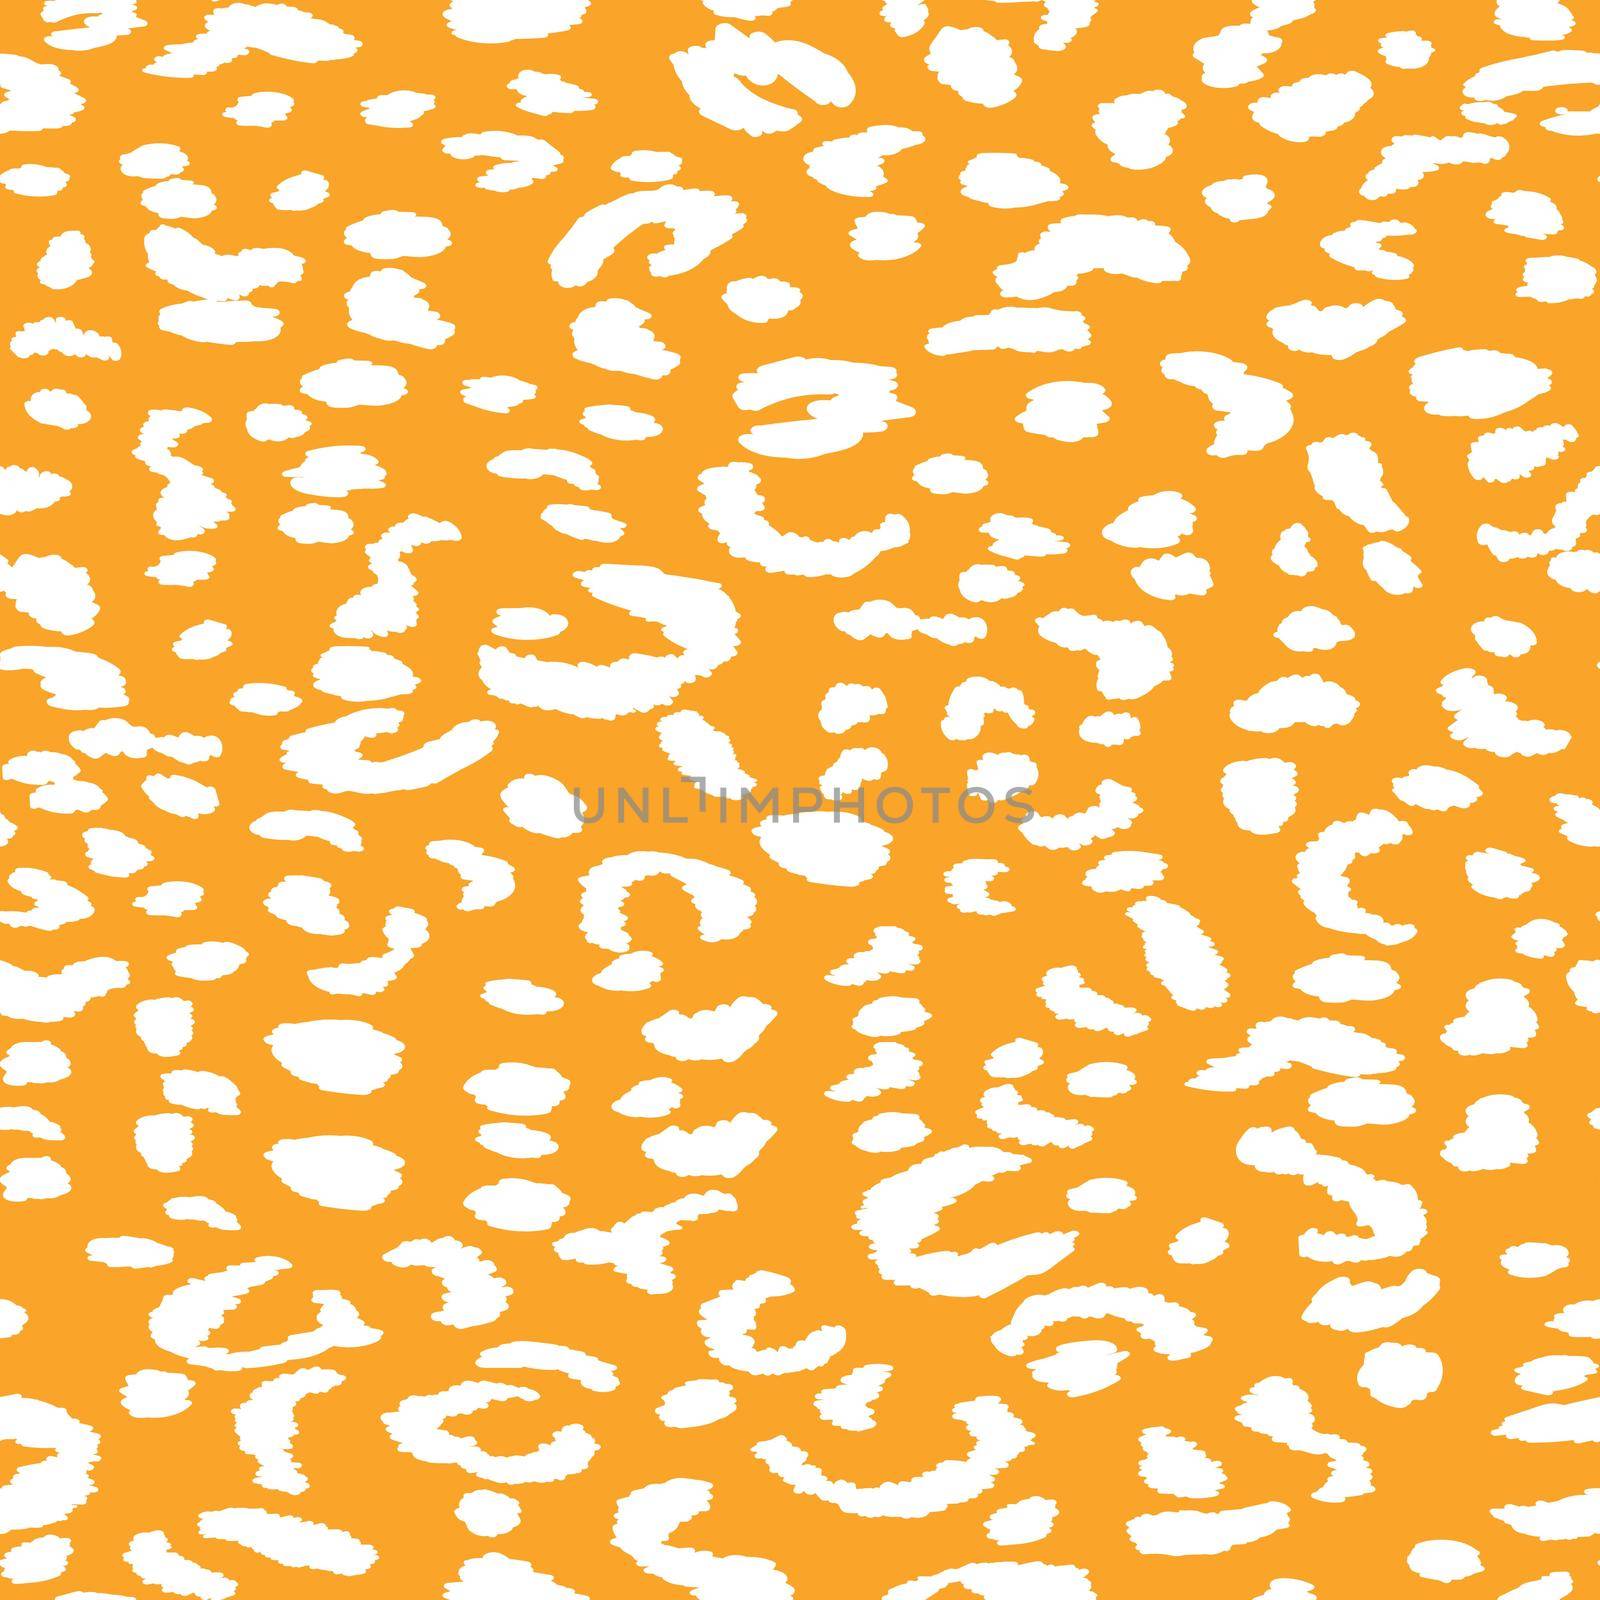 Abstract modern leopard seamless pattern. Animals trendy background. Orange decorative vector stock illustration for print, card, postcard, fabric, textile. Modern ornament of stylized skin.